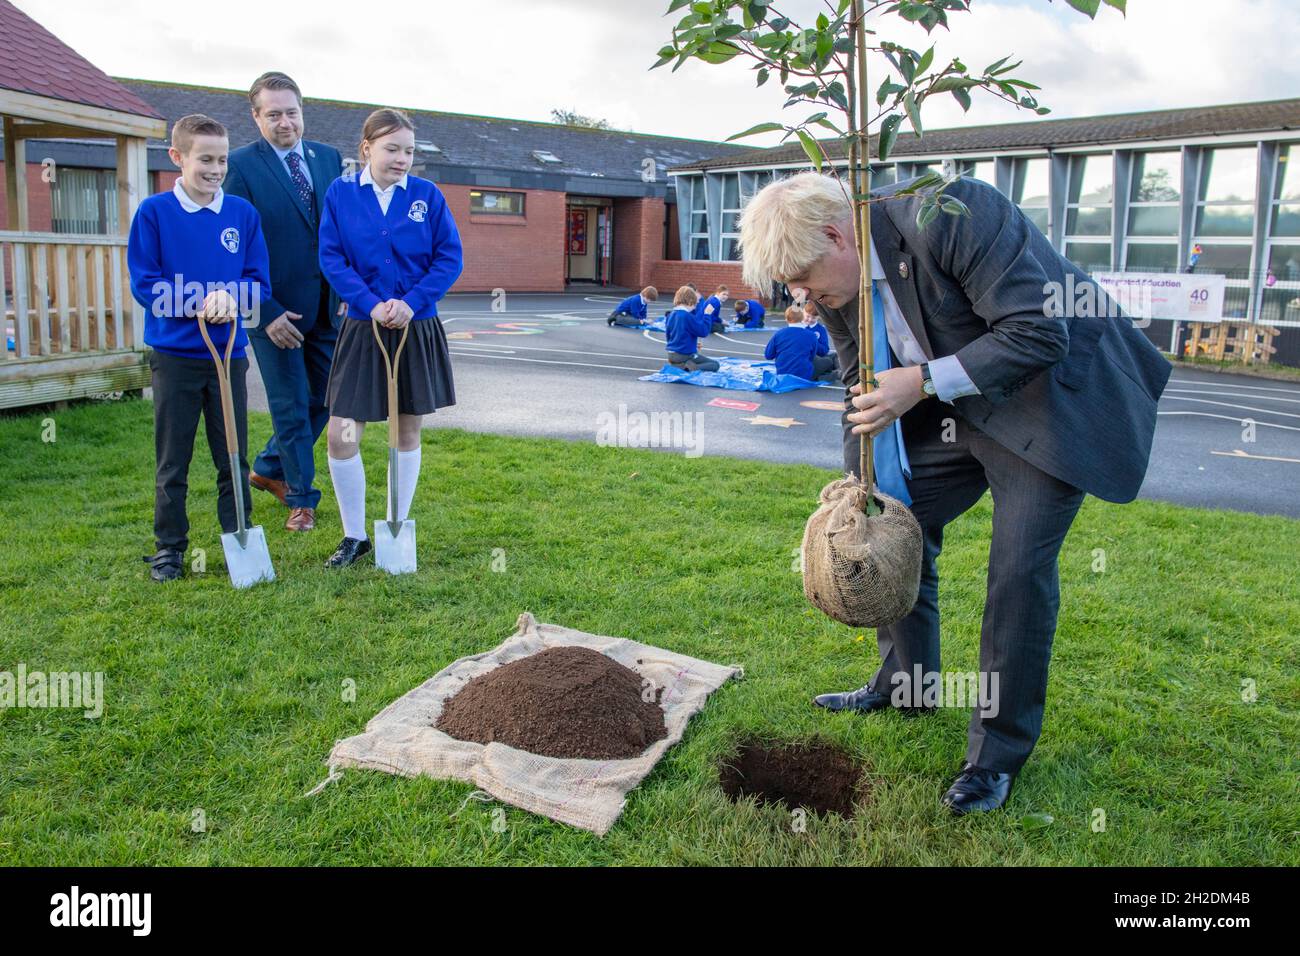 Prime Minister Boris Johnson plants a tree with help from P7 pupils Sophie and Oscar during a visit to Crumlin Intergrated primary school in County Antrim. Picture date: Thursday October 21, 2021. Stock Photo